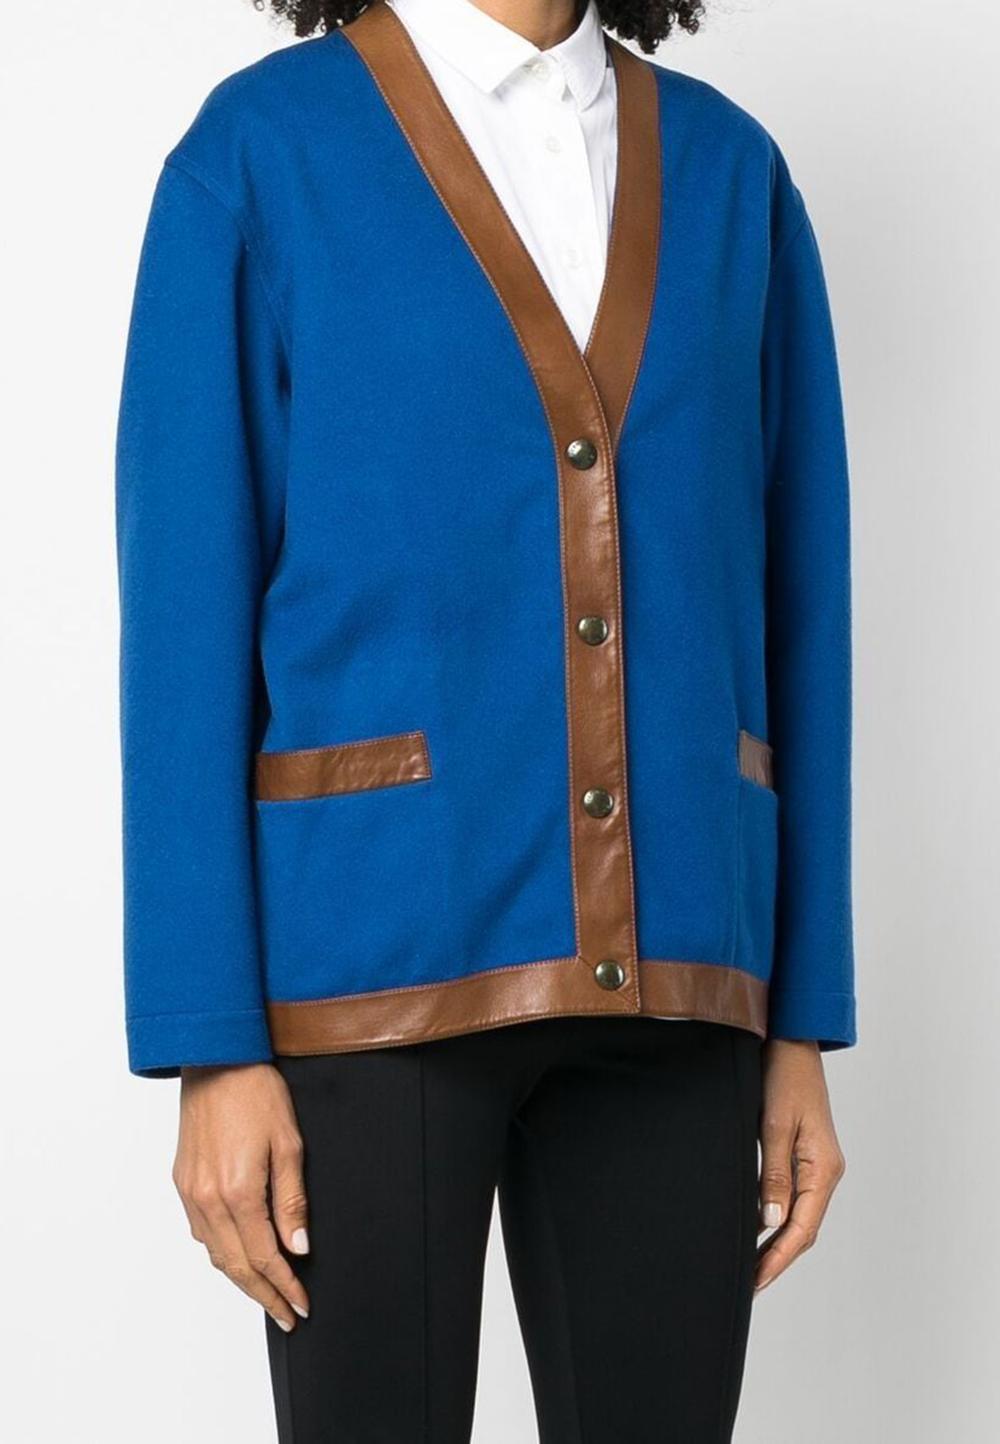 Hermes blue V-neck wool jacket featuring a camel leather trim, a V-neck, a front logo snap button fastening, long sleeves
and a straight hem.
Composition: 100% wool
 and trim: 100% leather 
Label size 38fr/US6 /UK10
In good vintage condition. Made